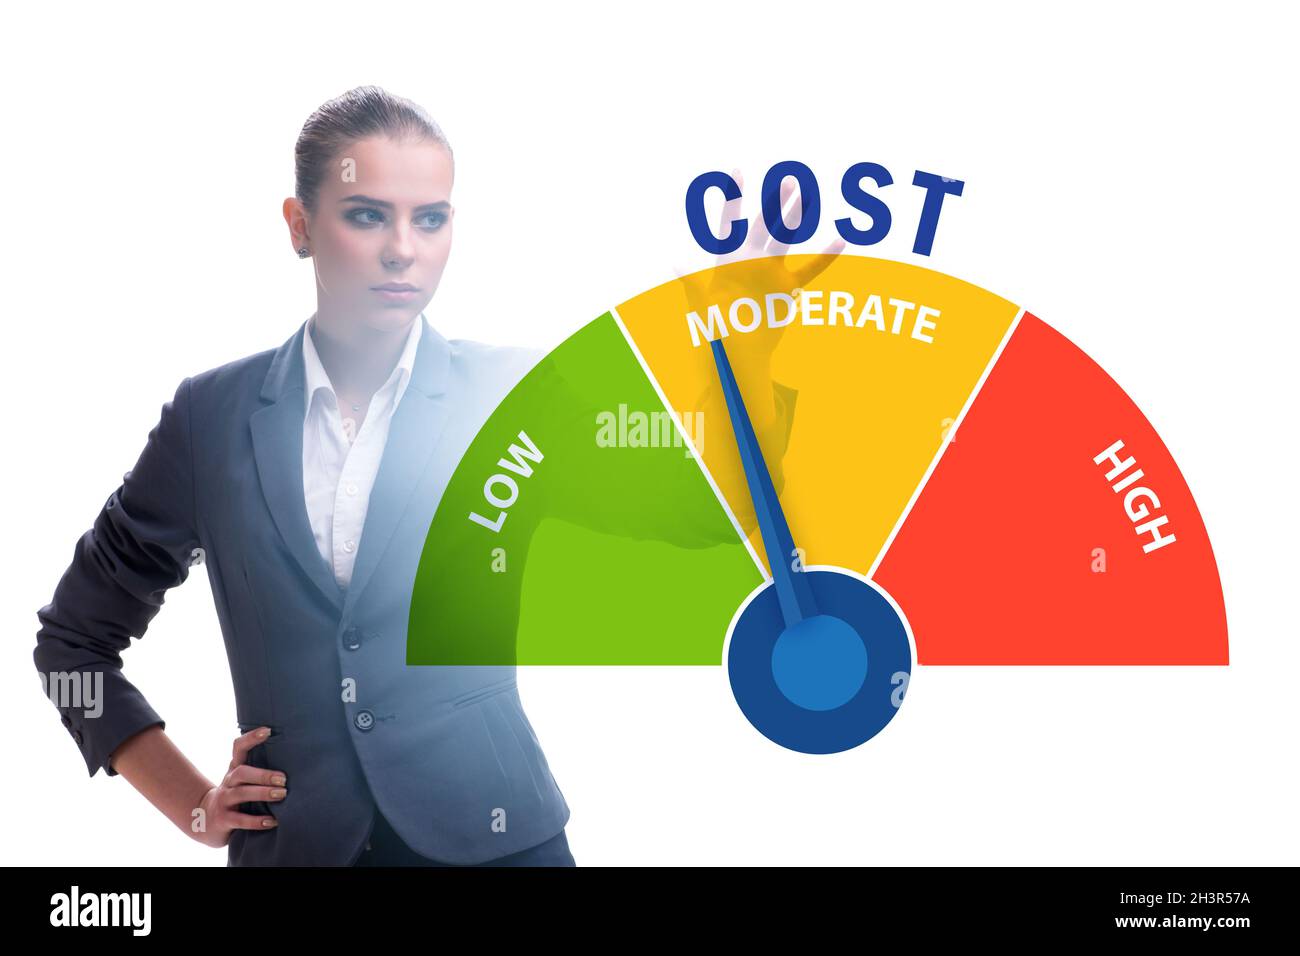 Businesswoman in cost management concept Stock Photo